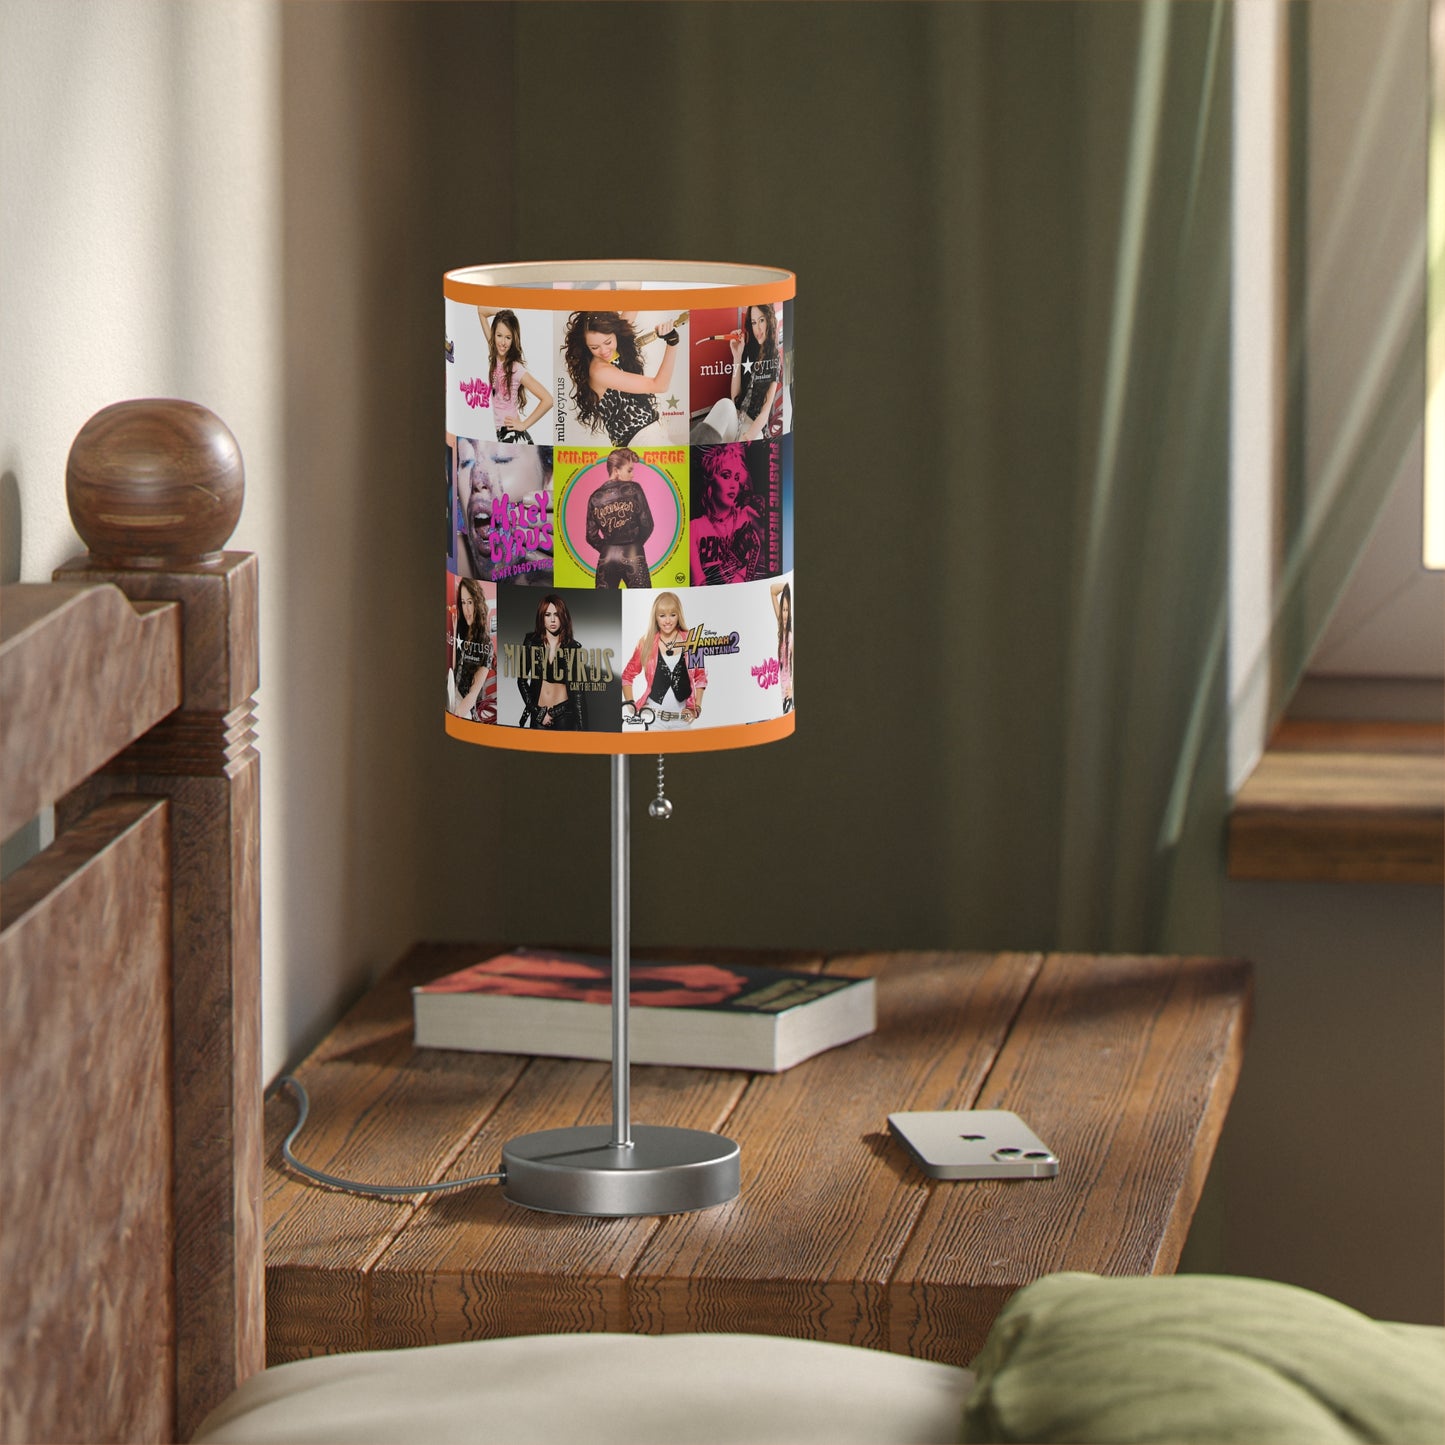 Miley Cyrus Album Cover Collage Lamp on a Stand